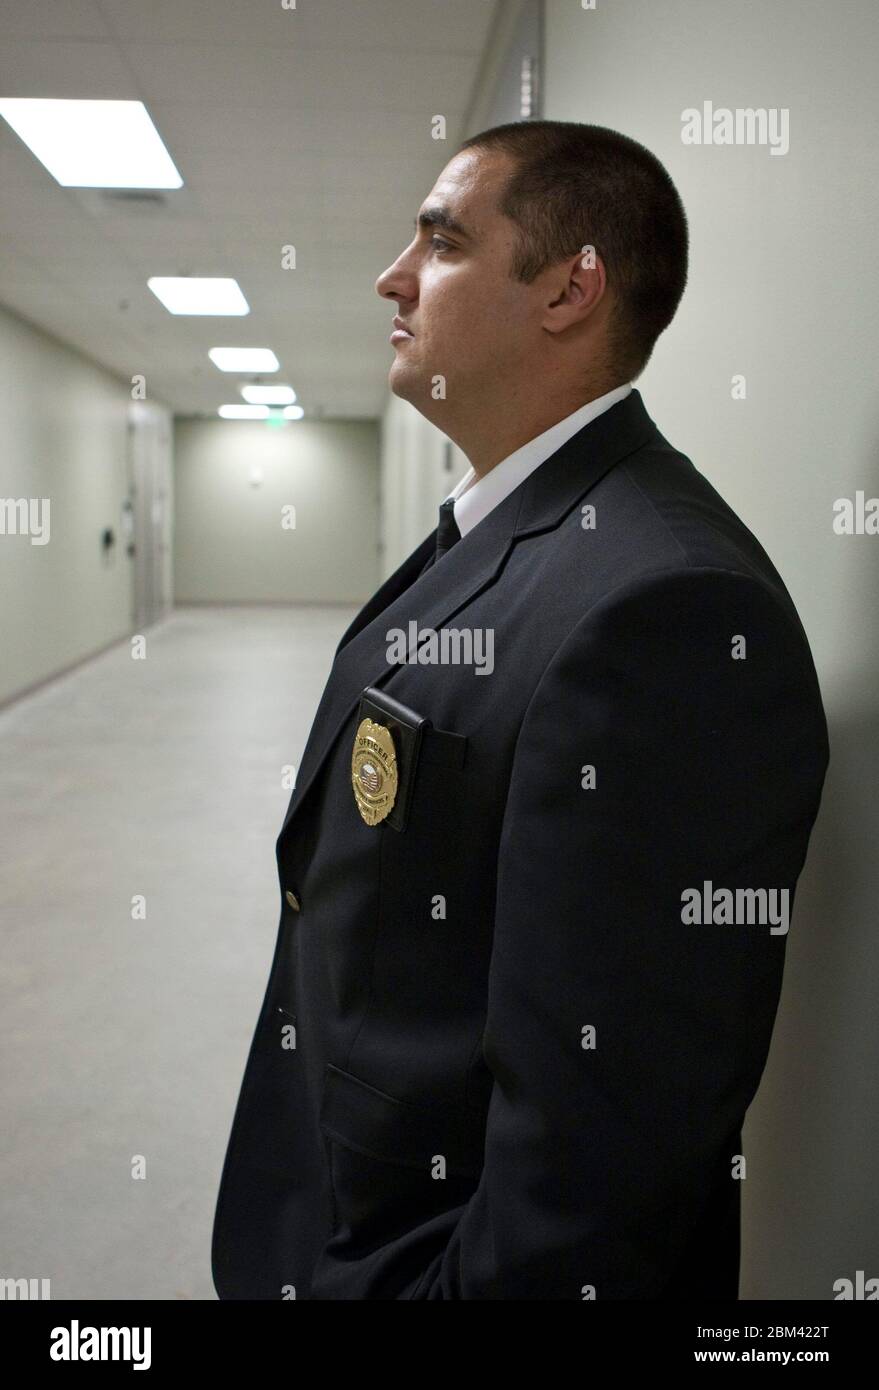 Bastrop Texas USA, November 10 , 2011: Security guard stands in empty hallway at electric power management facility. ©Marjorie Kamys Cotera/Daemmrich Photography Stock Photo